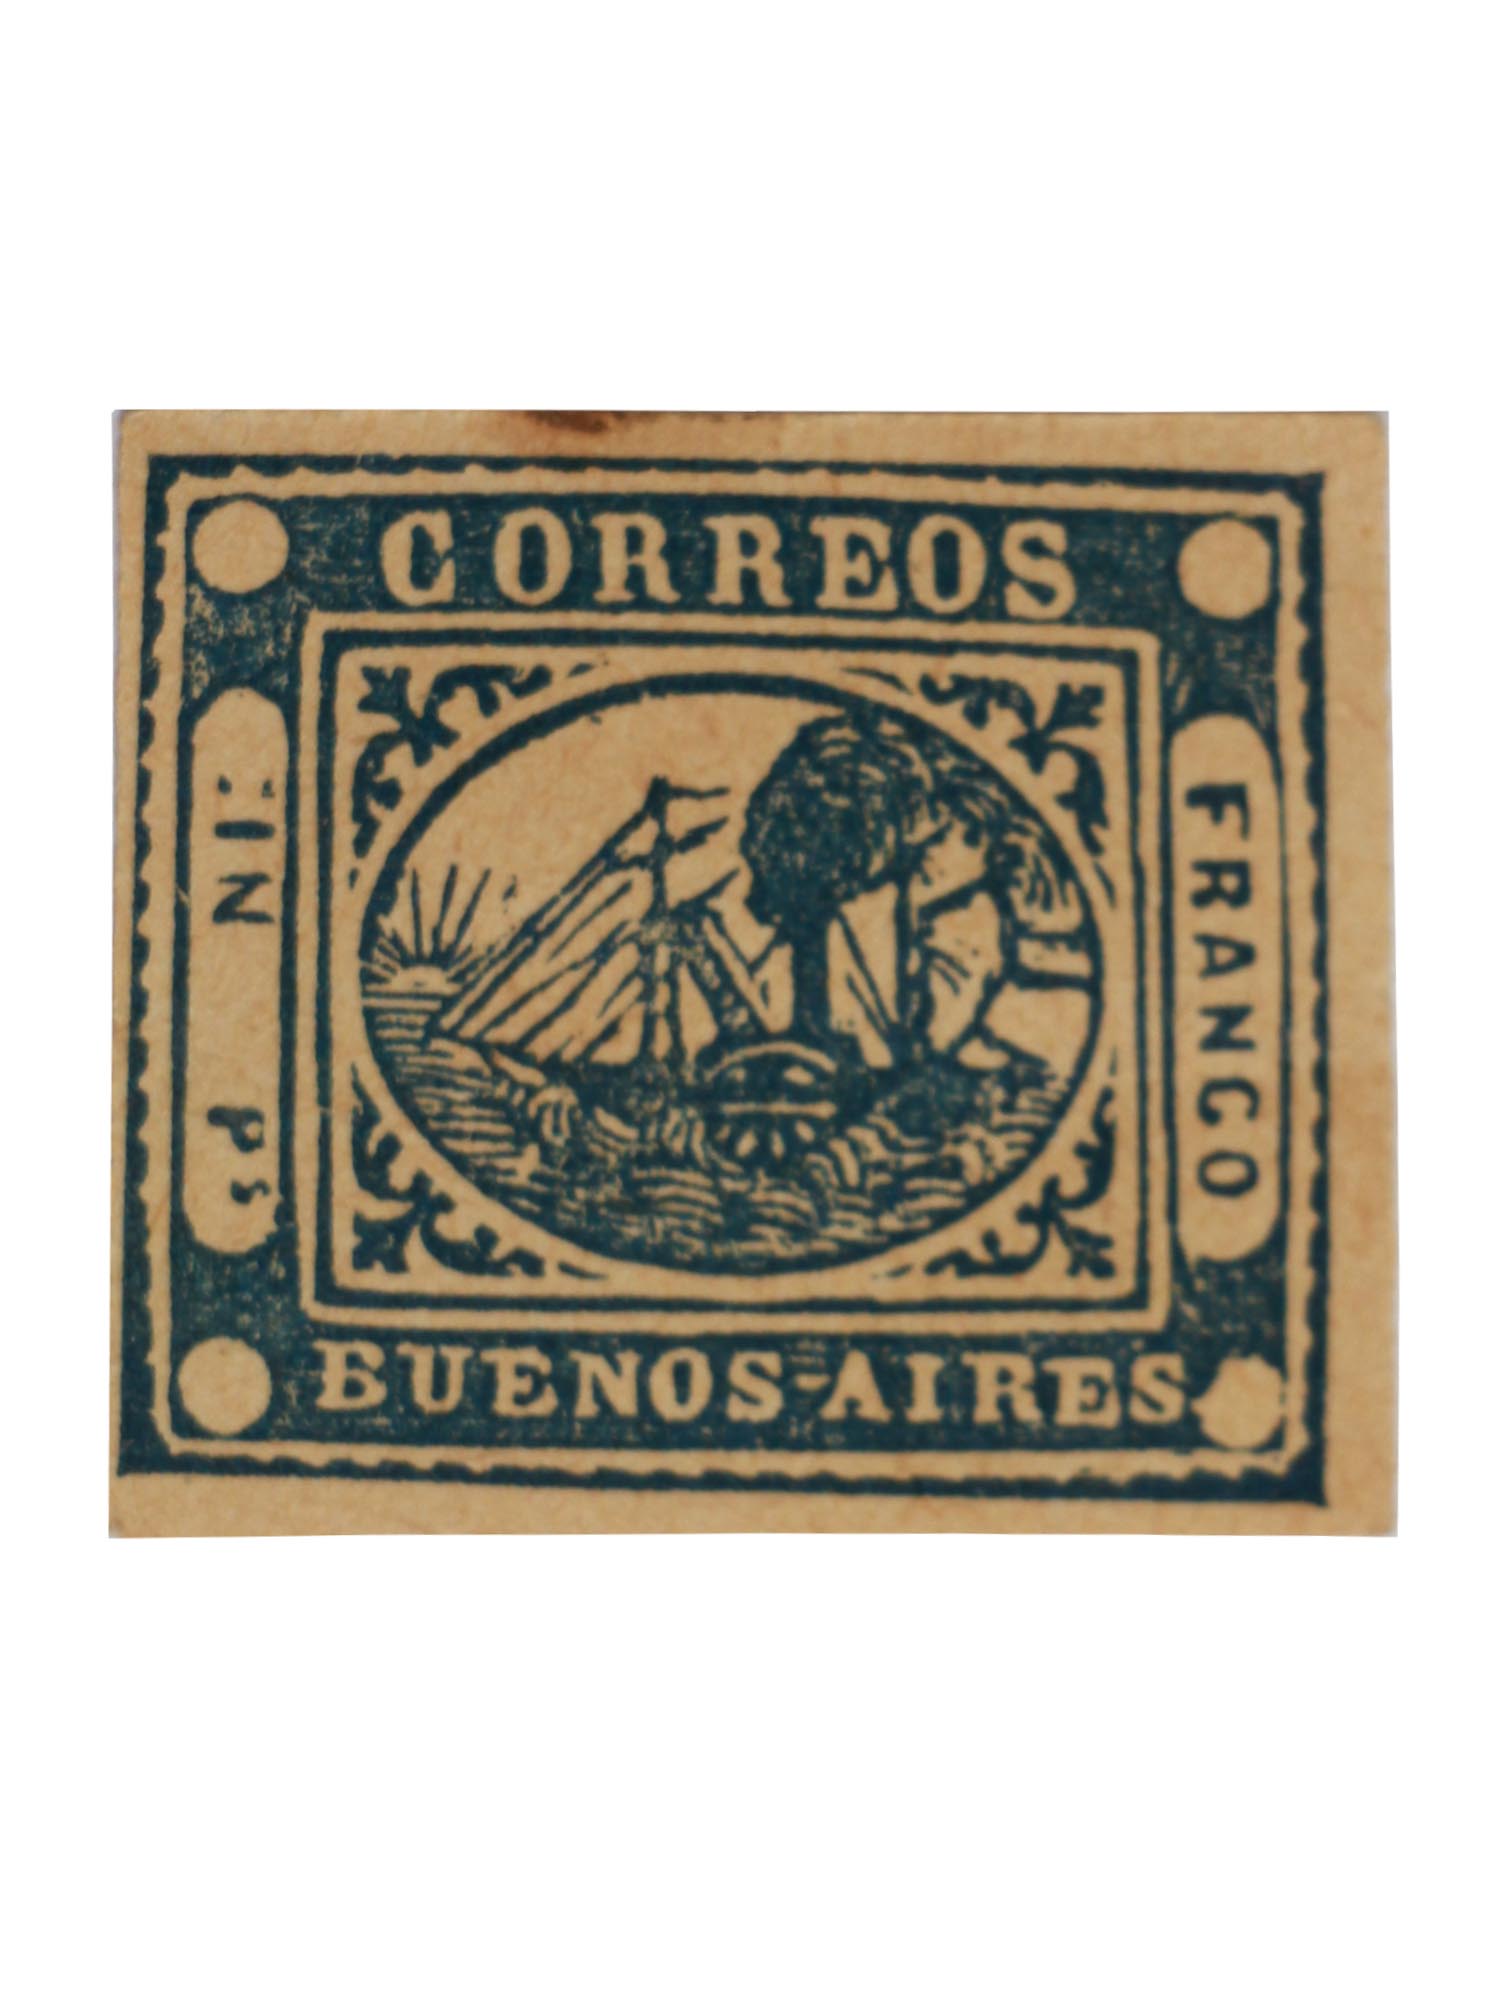 VARIOUS ANTIQUE SPAIN AND COLONIES STAMPS PIC-1